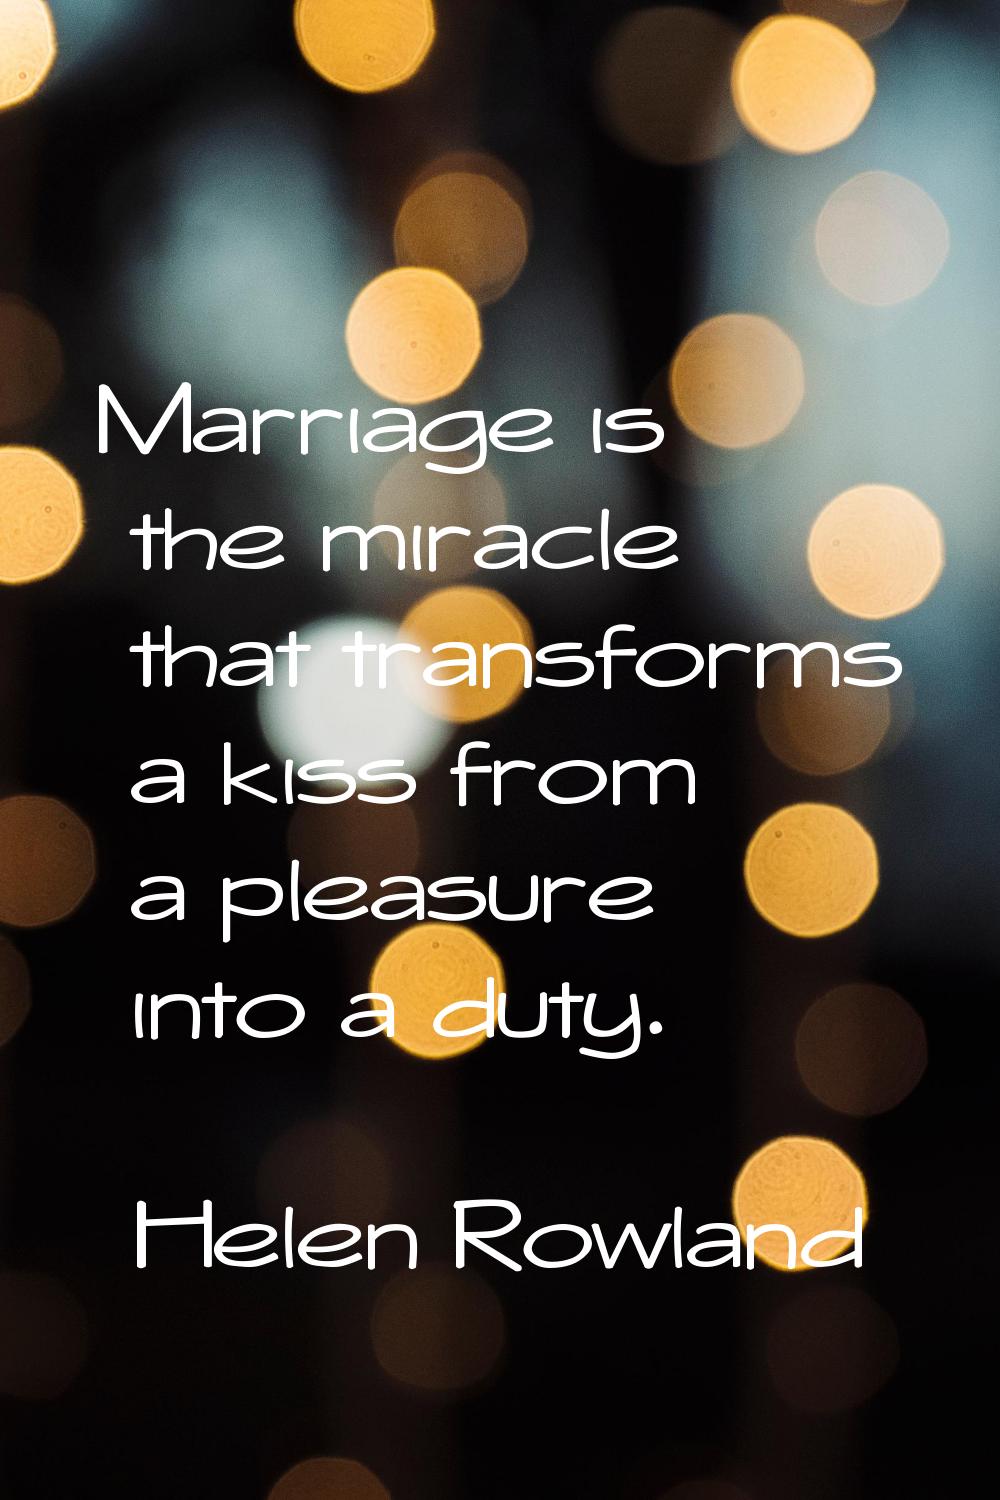 Marriage is the miracle that transforms a kiss from a pleasure into a duty.